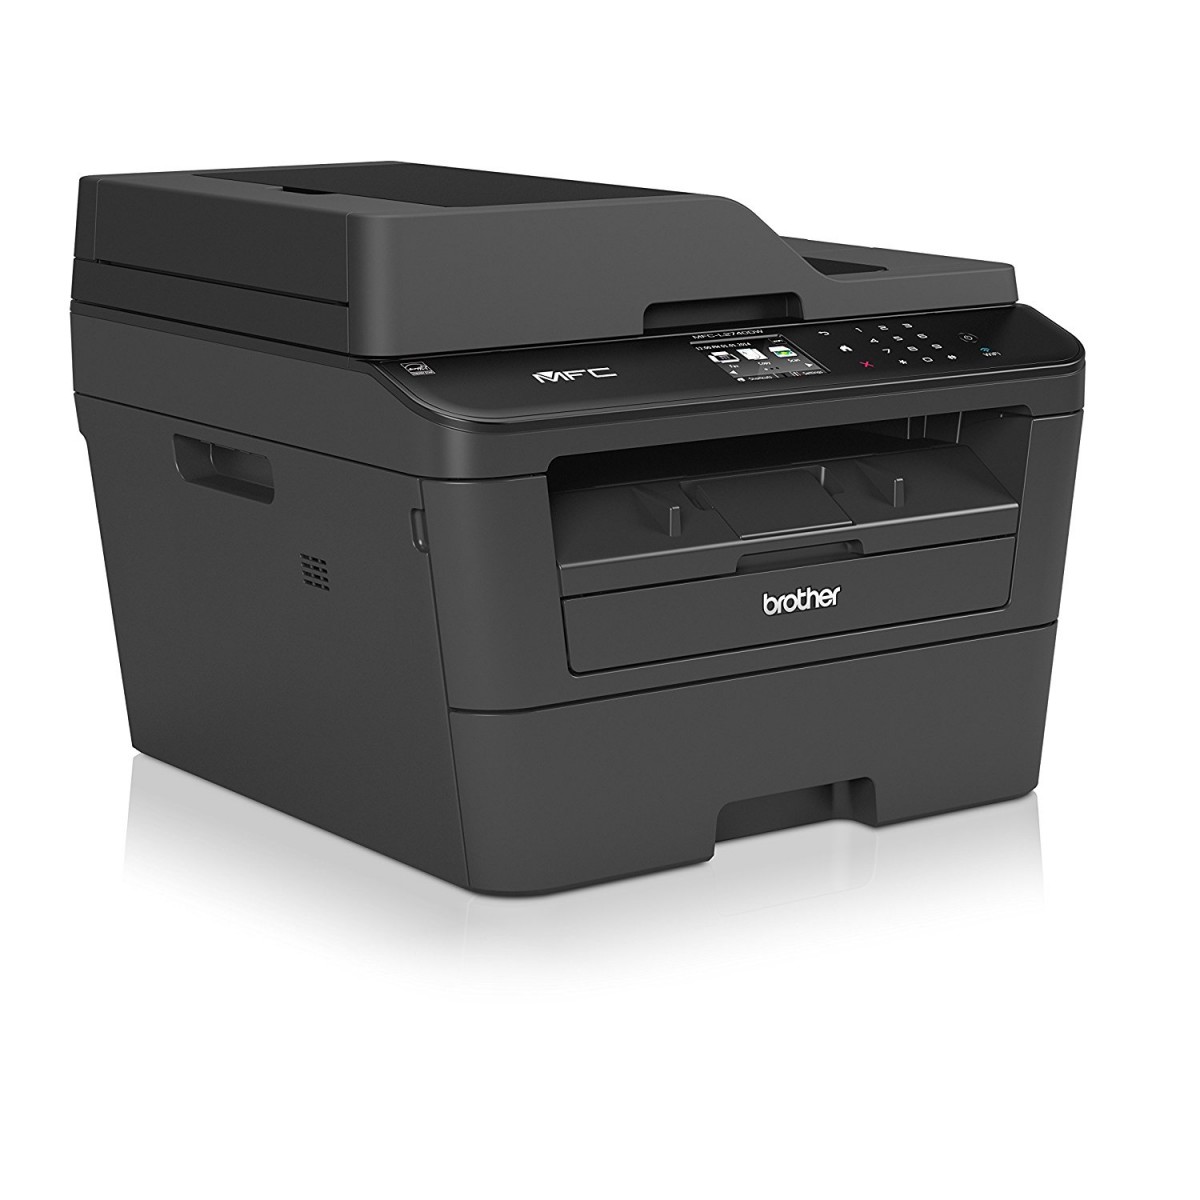 brother mfc-l2750dw home printer review